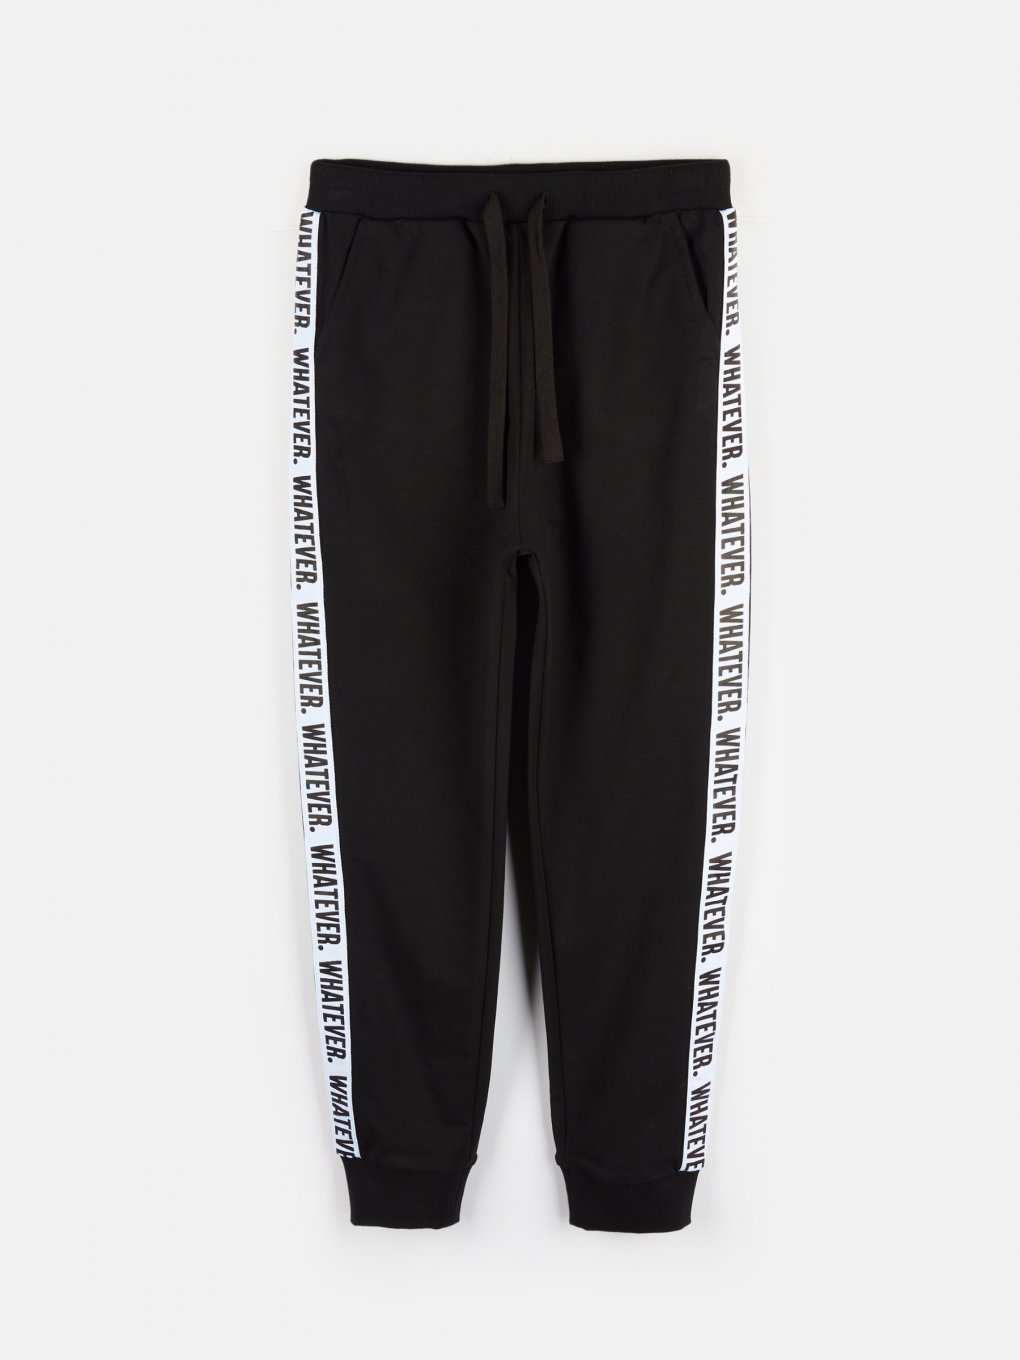 Sweatpants with side tape